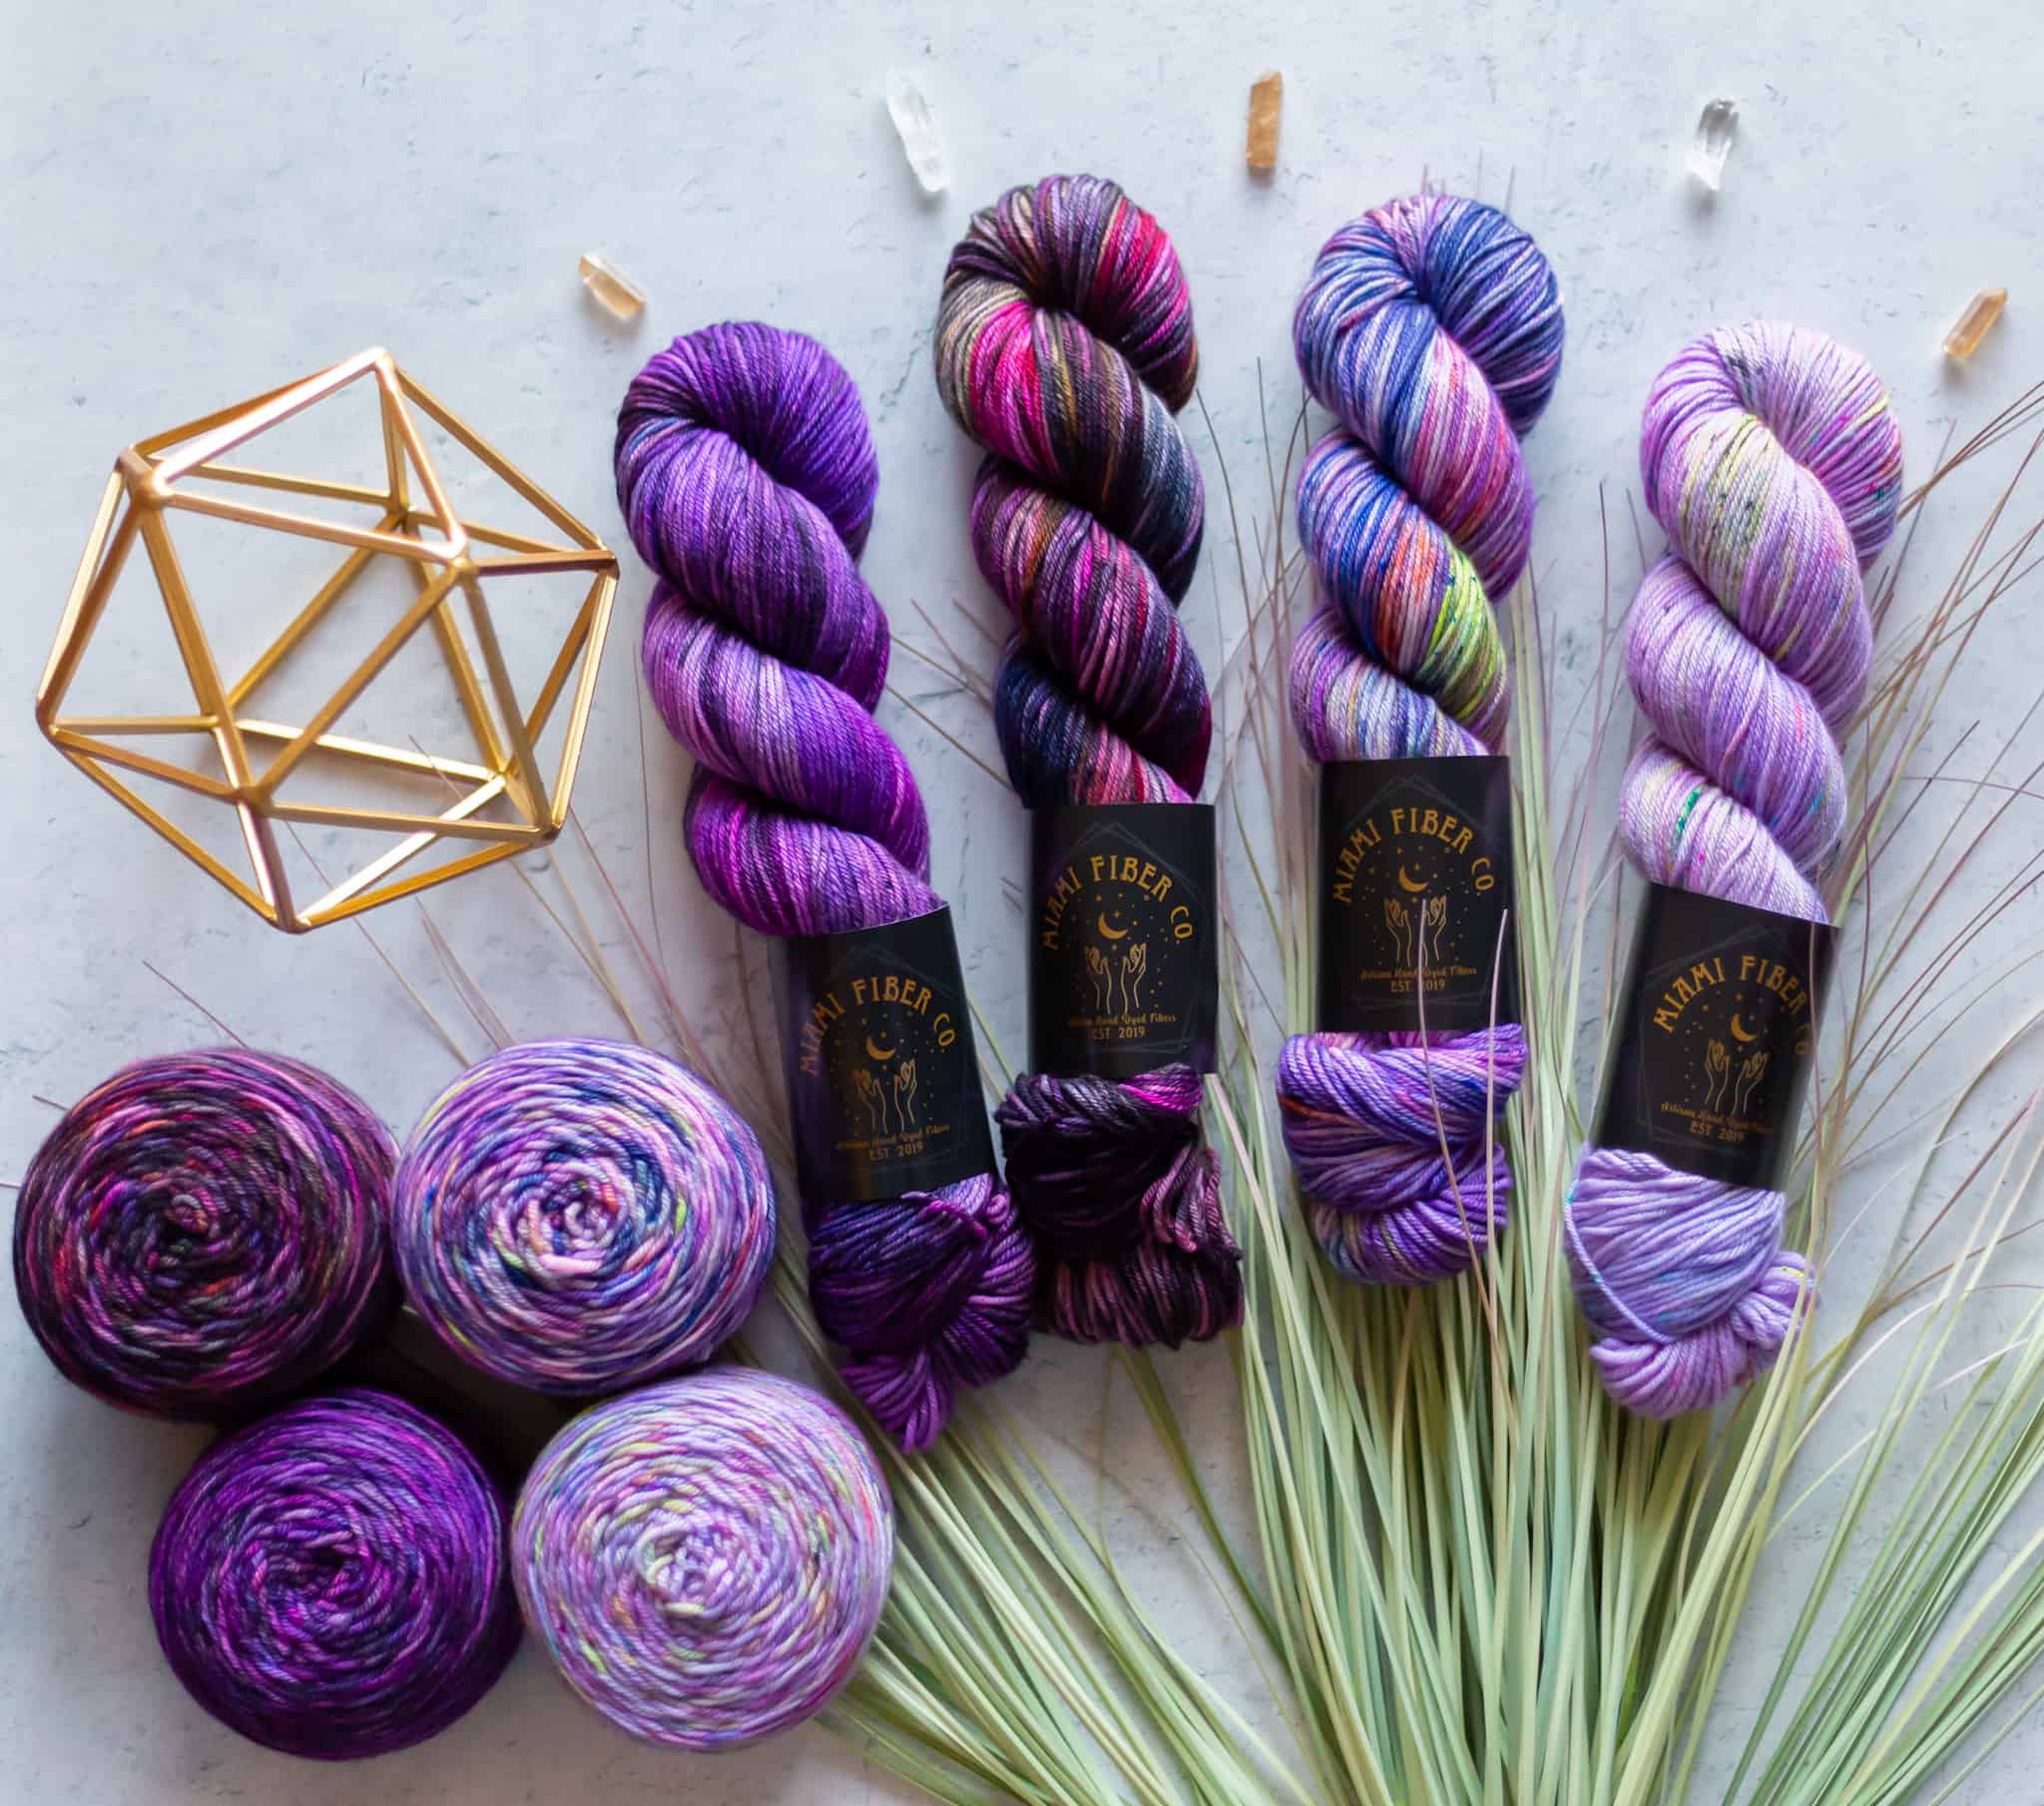 Skeins of purple and pink speckled yarn.